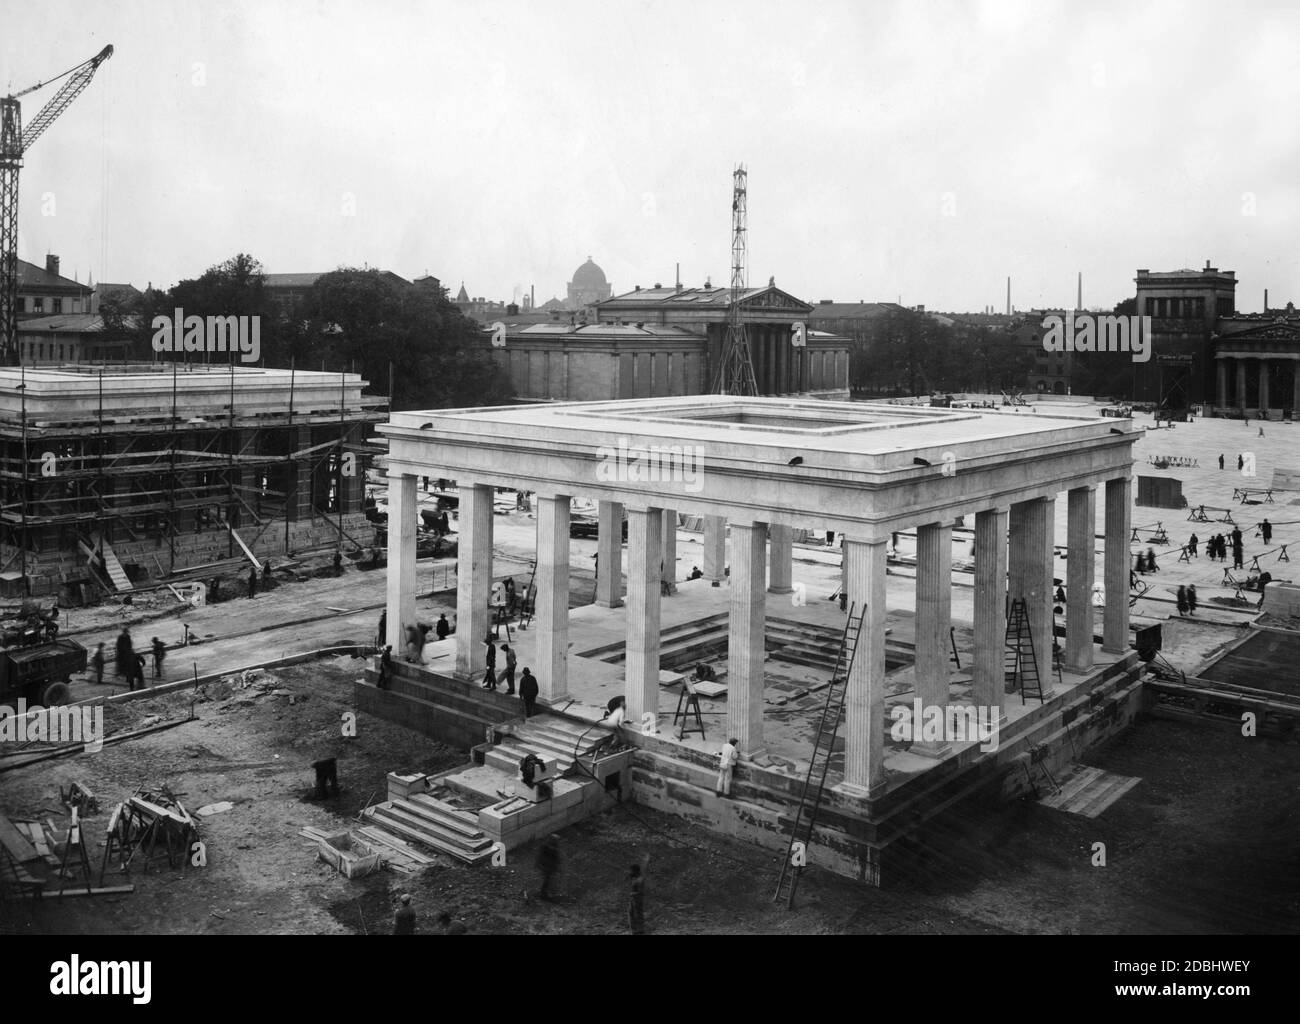 'Construction of the Ehrentempel (''Temples of Honour'') on Munich's Koenigsplatz. On the left is the construction site of the second Ehrentempel.' Stock Photo